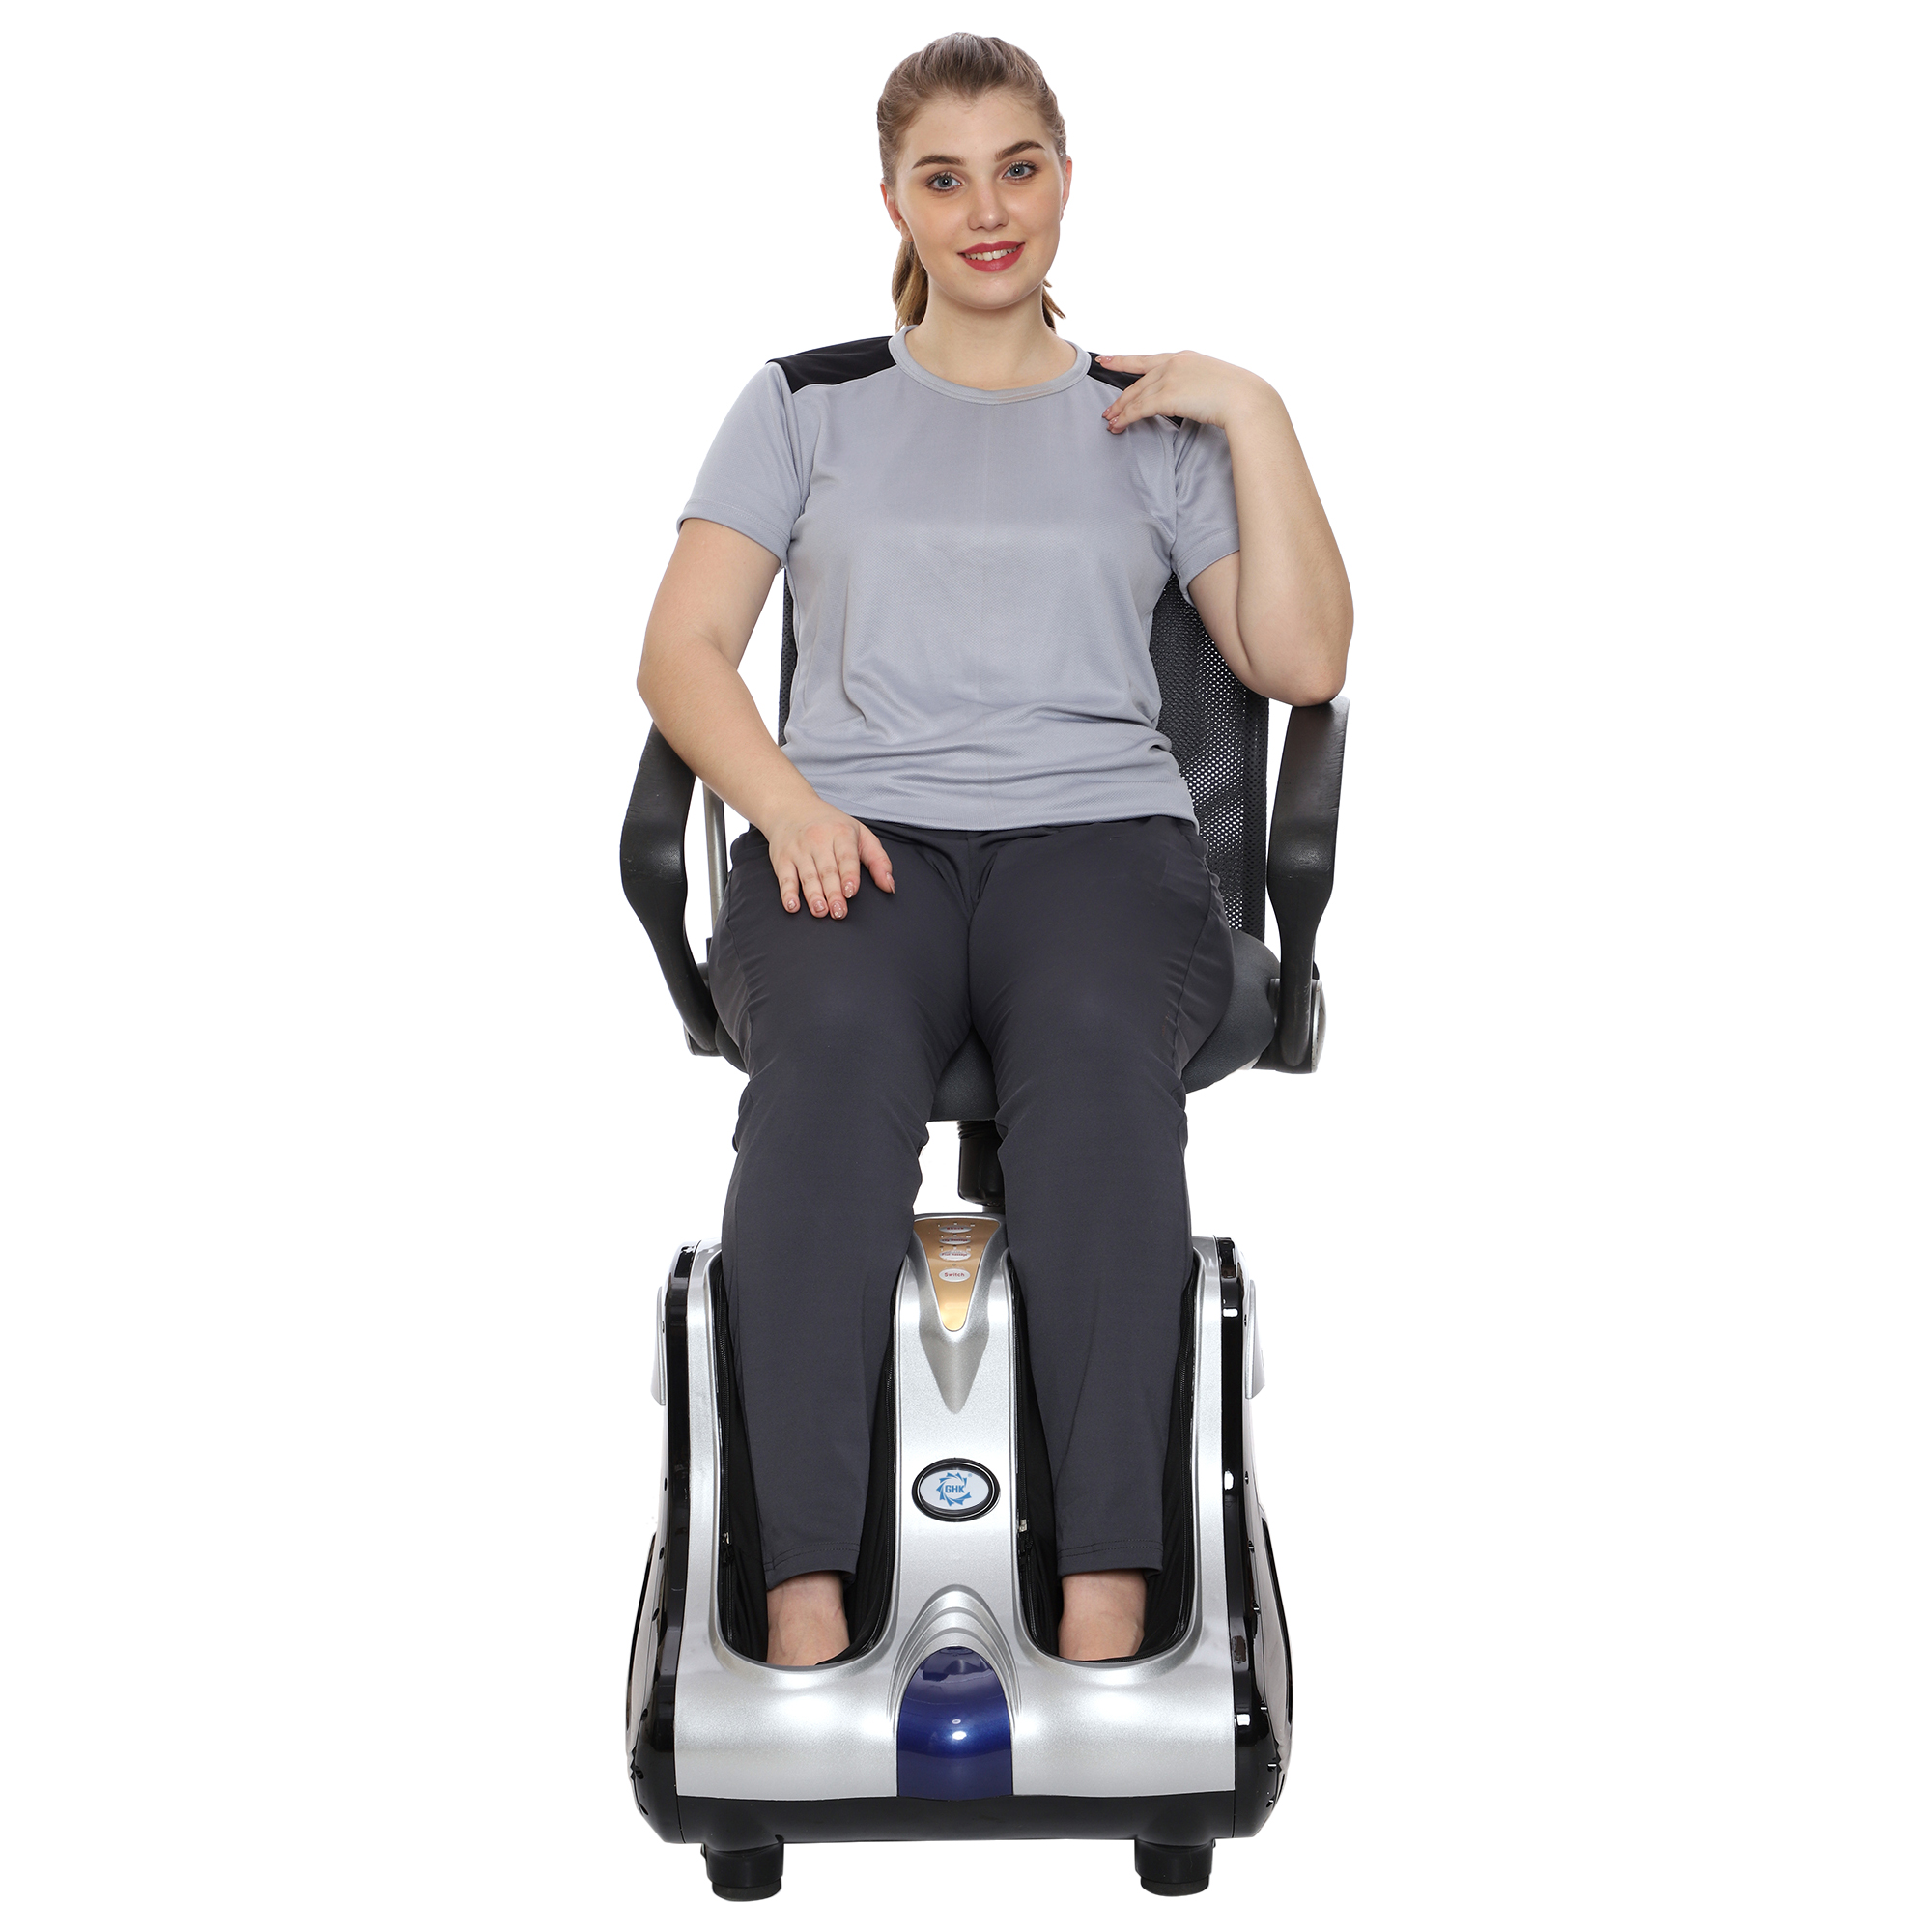 GHK H30 Leg and Foot Massager Machine with Foot Rollers & Vibration for Complete Relaxation